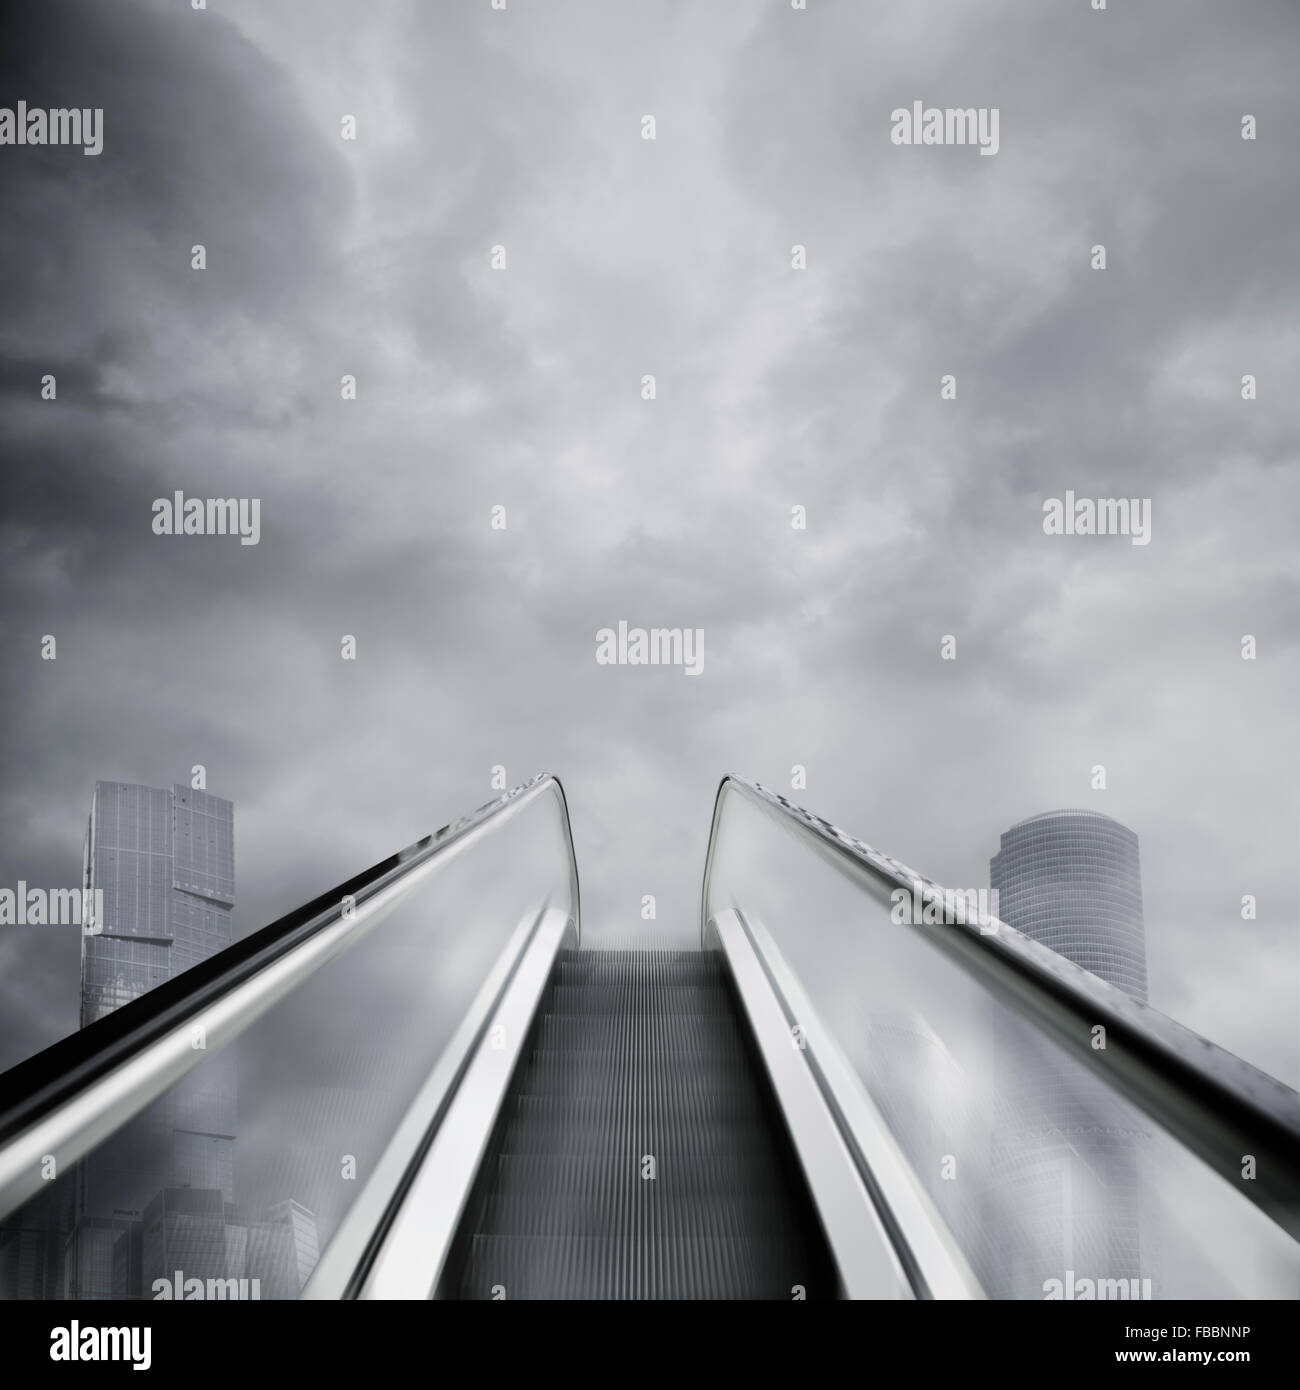 empty escalator as symbol of freedom in business Stock Photo